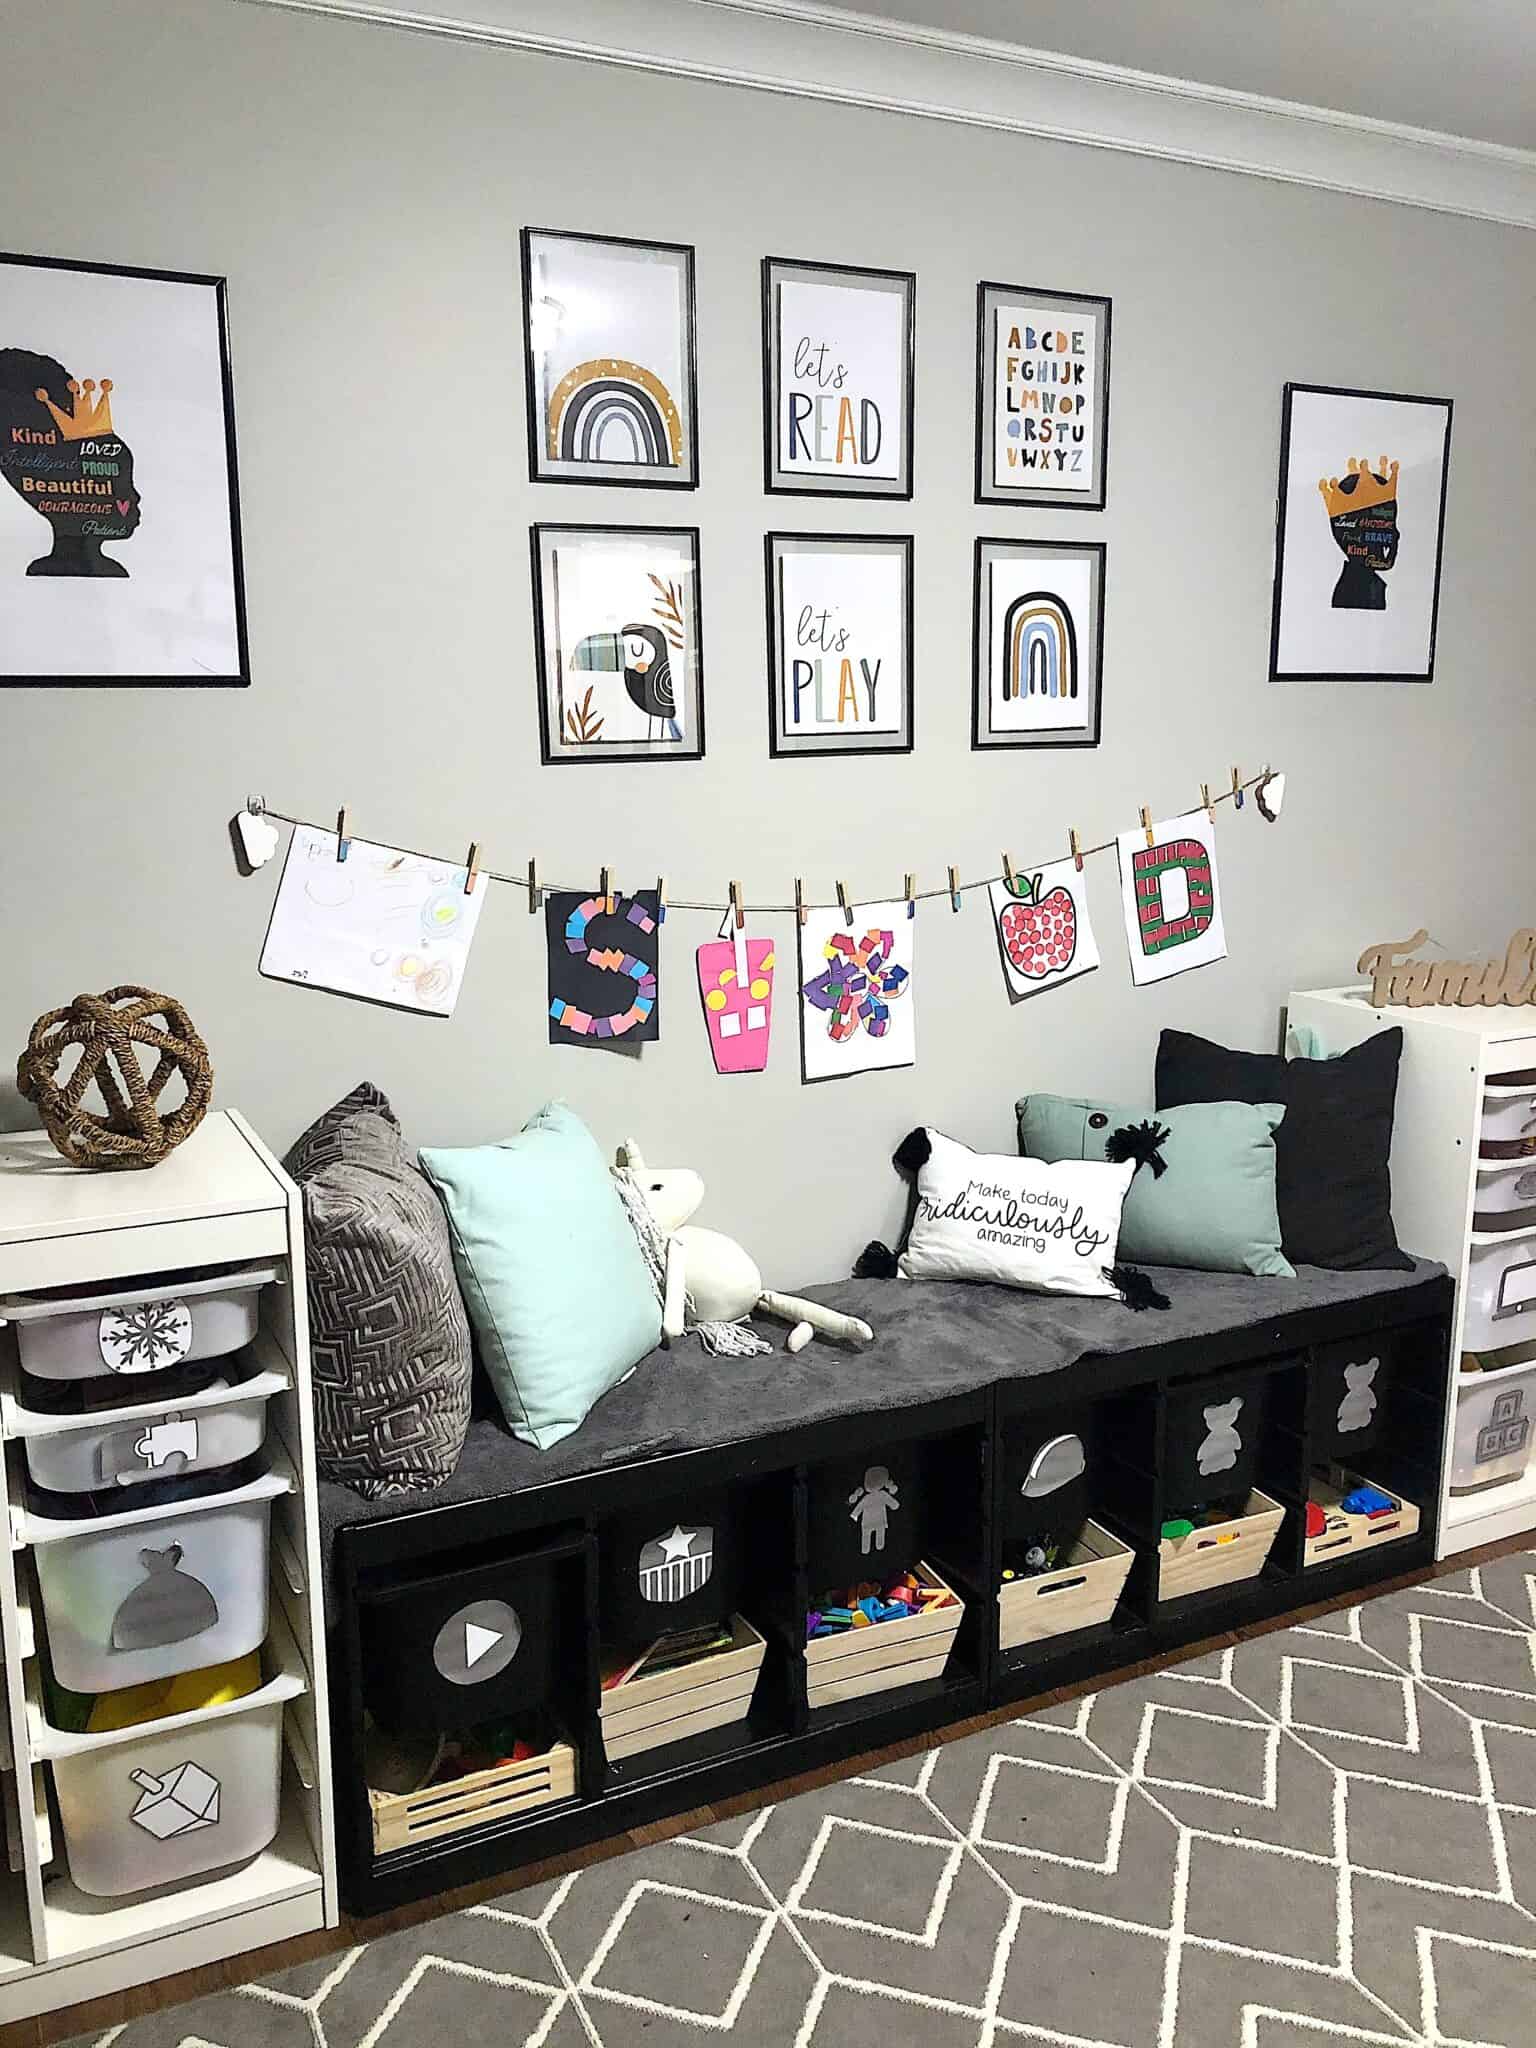 Our Ikea Playroom Storage Makeover Reveal, Best Ikea Storage For Playroom